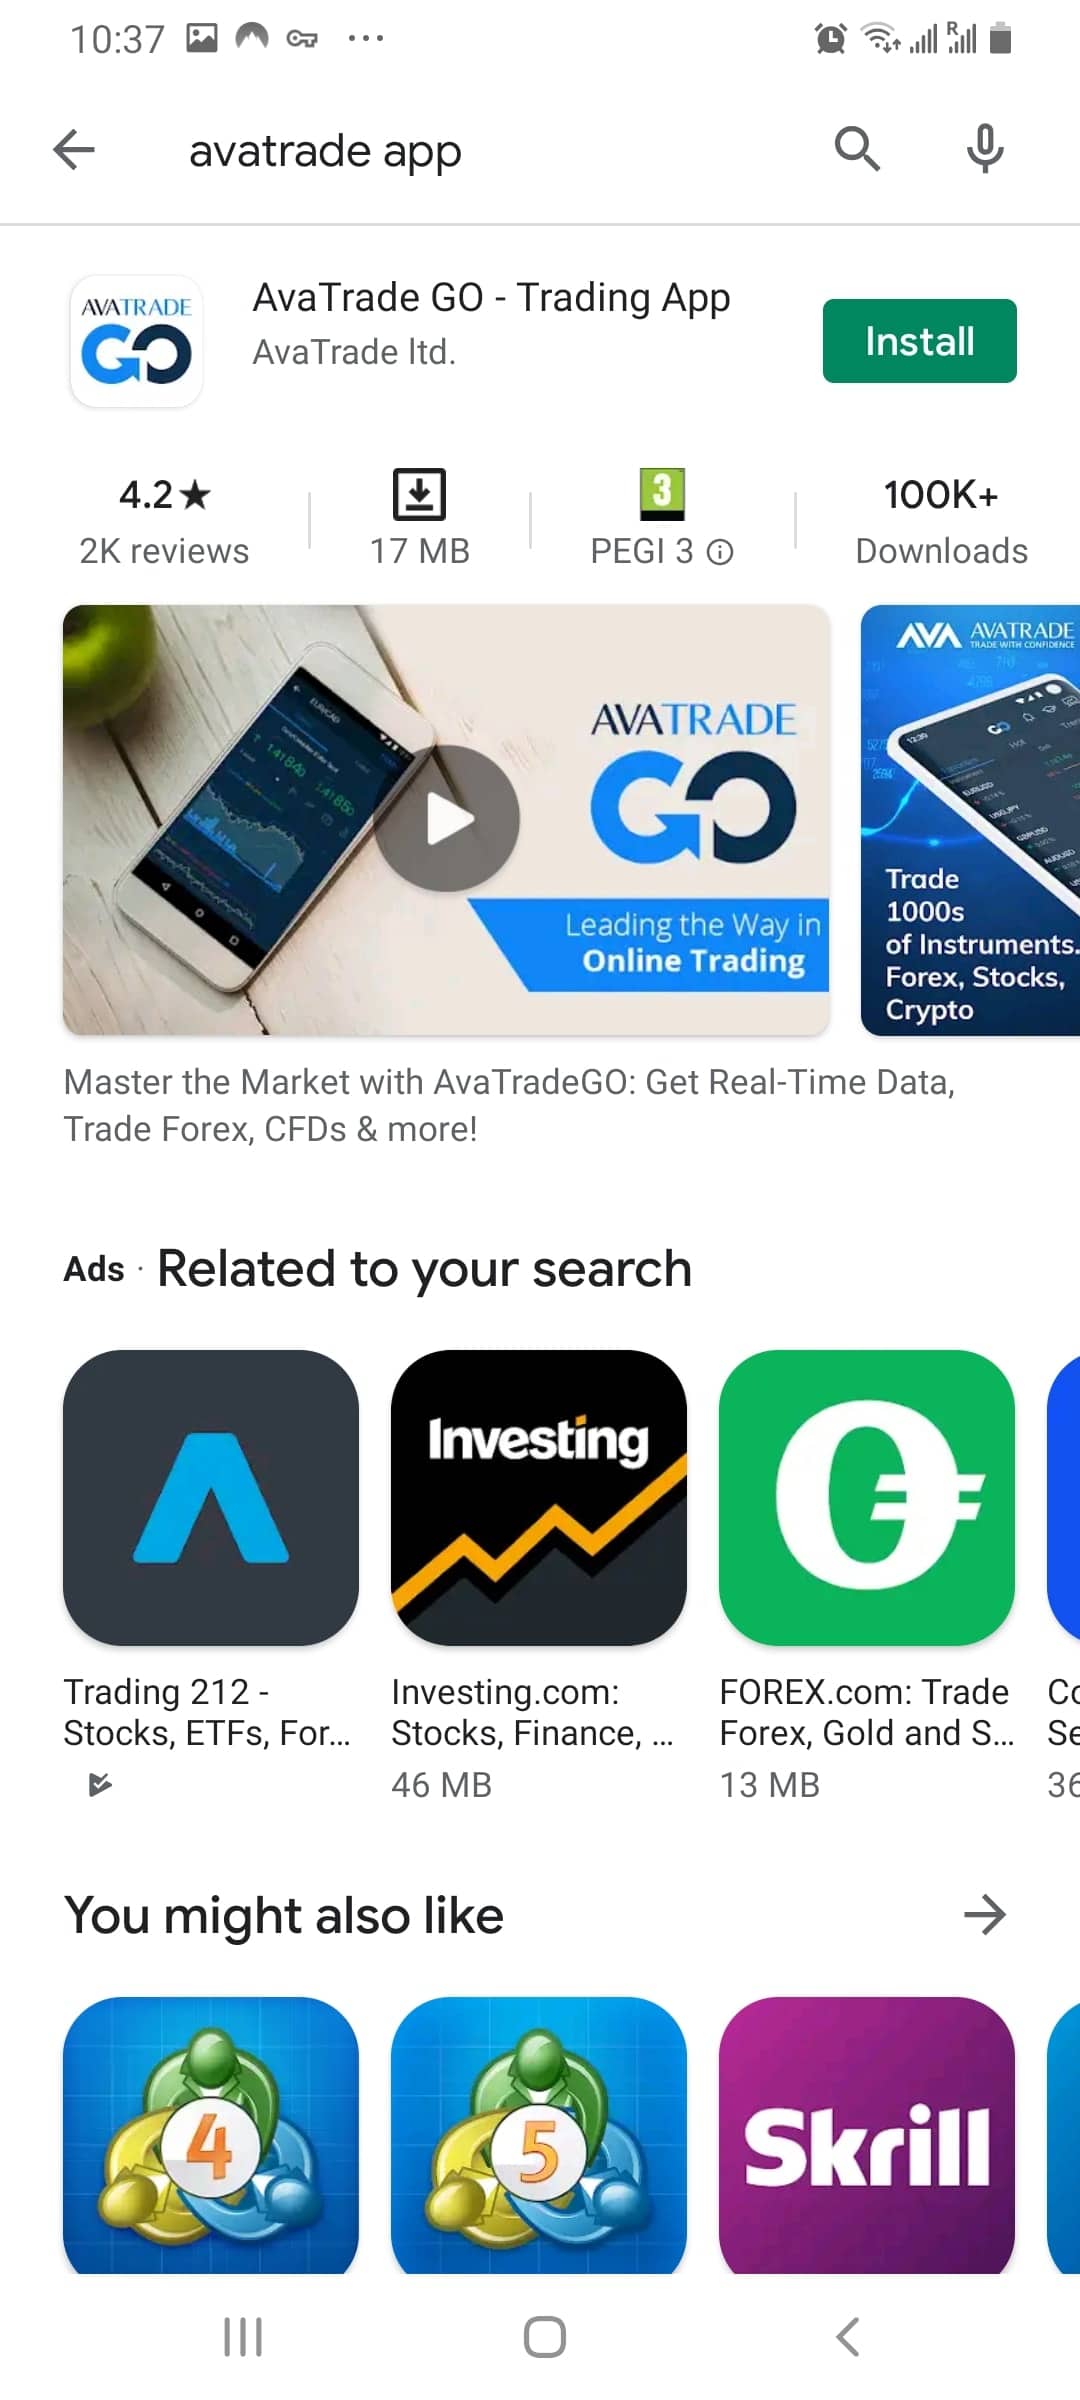 Best Forex Trading App May 2022 - Top Apps Revealed